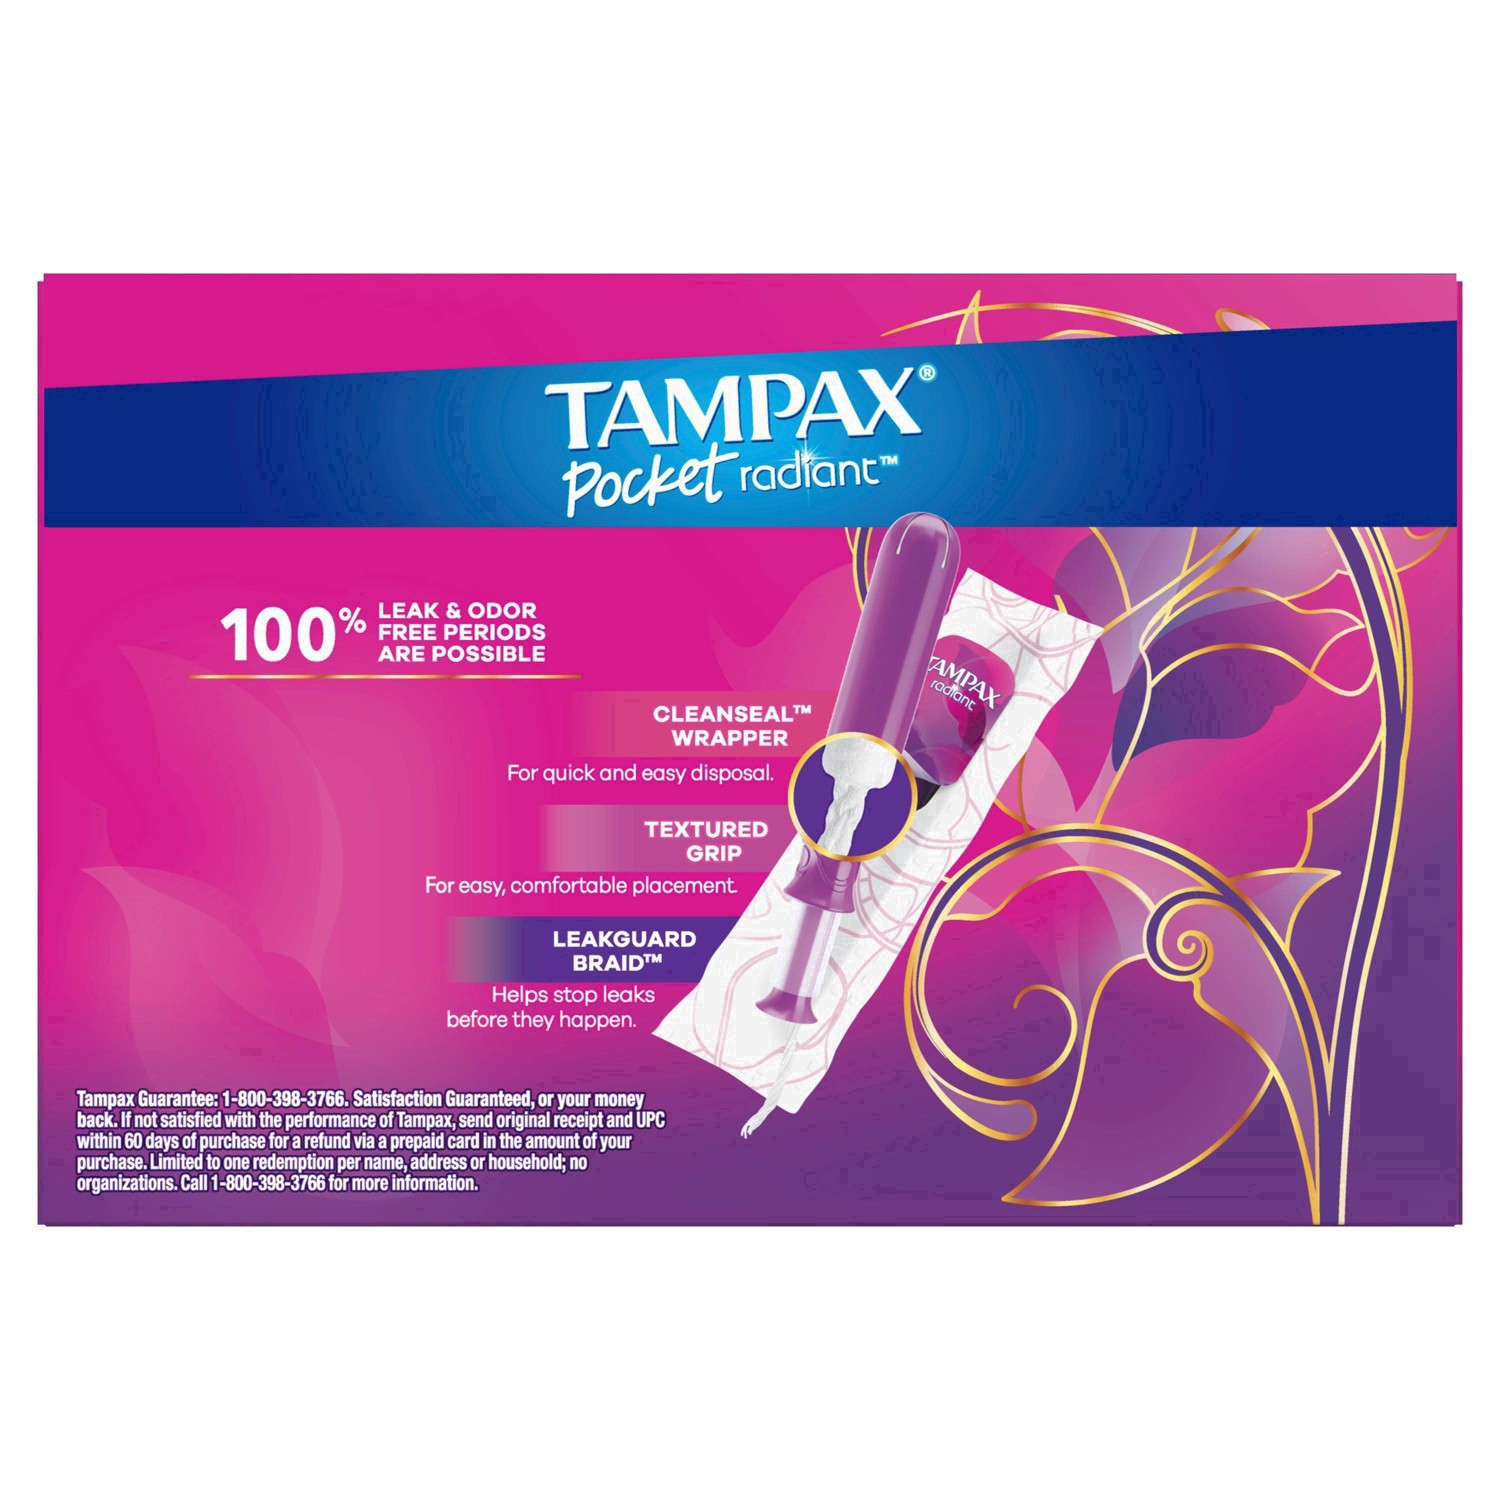 slide 83 of 94, Tampax Pocket Radiant Compact Plastic Tampons, With LeakGuard Braid, Super Absorbency, Unscented, 28 Count, 28 ct